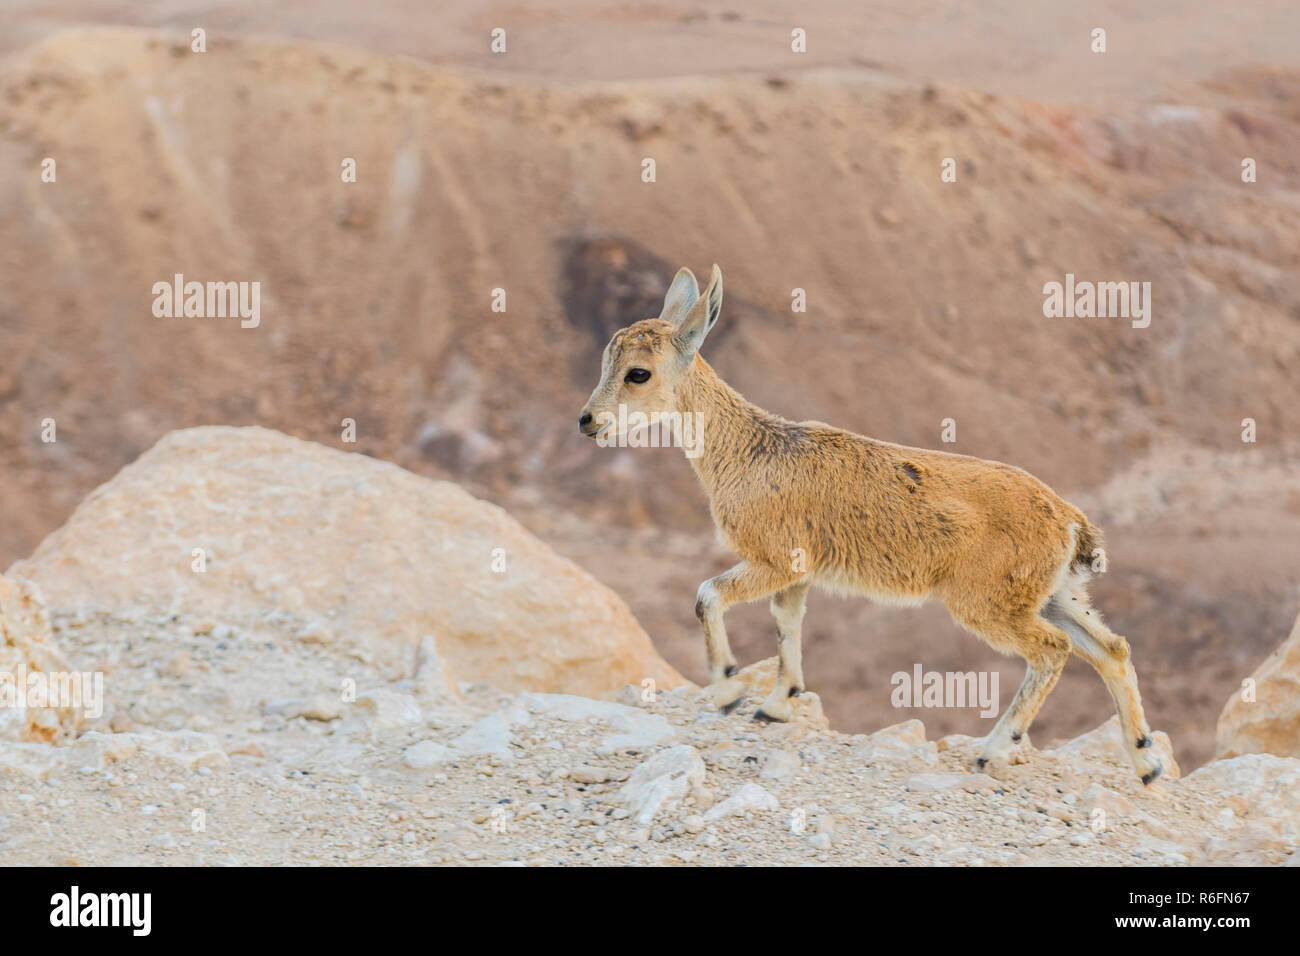 Wild Young Nubian Ibex (Capra Nubiana) On The Cliff Edge At Ramon Crater In Negev Desert, Israel Stock Photo